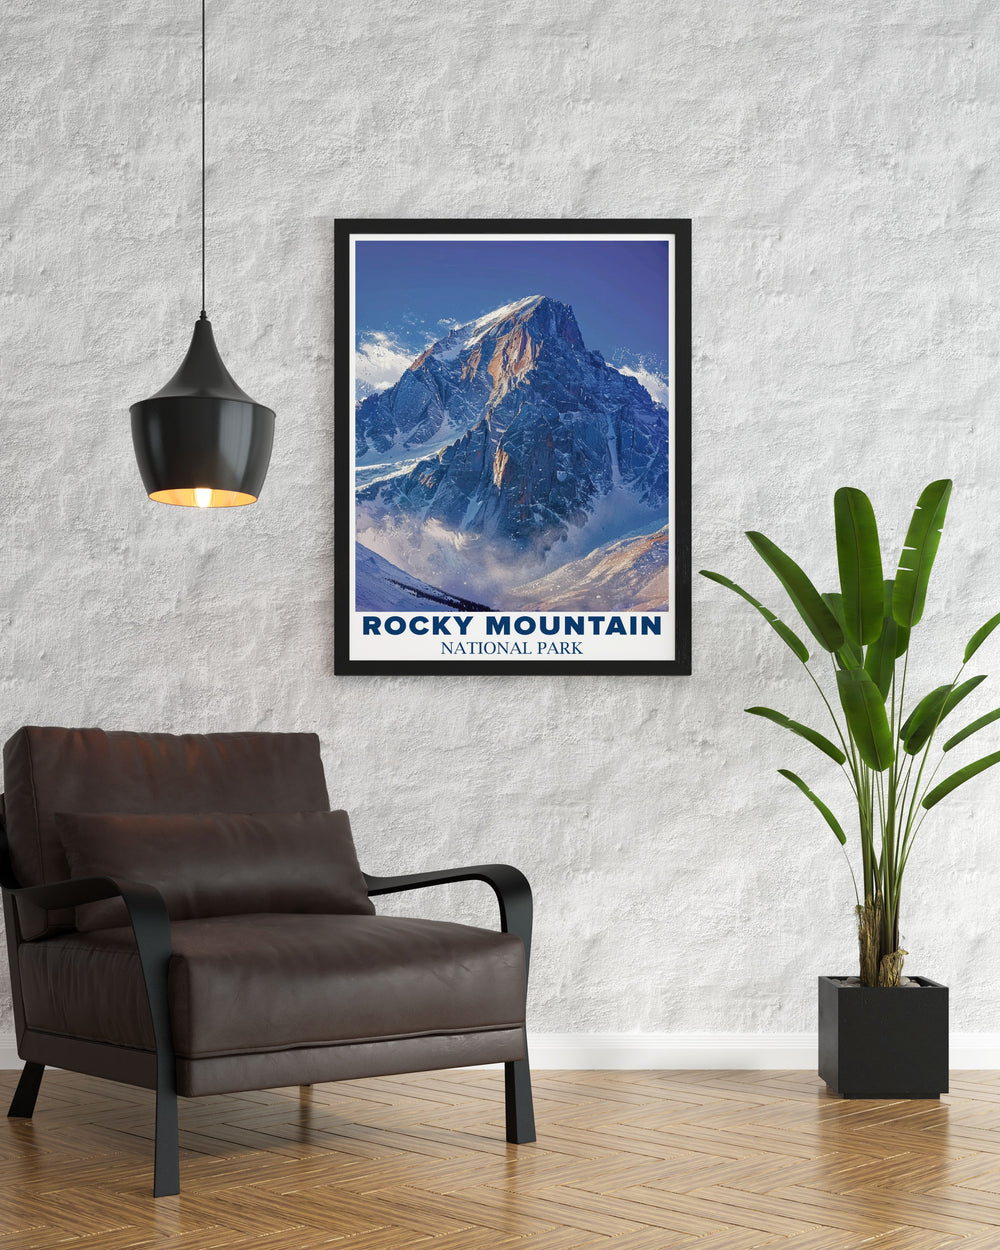 Vintage travel print of Long Peak in the Colorado Rockies highlighting the natural beauty of the national park a great addition to any art collection or as a thoughtful gift for outdoor enthusiasts